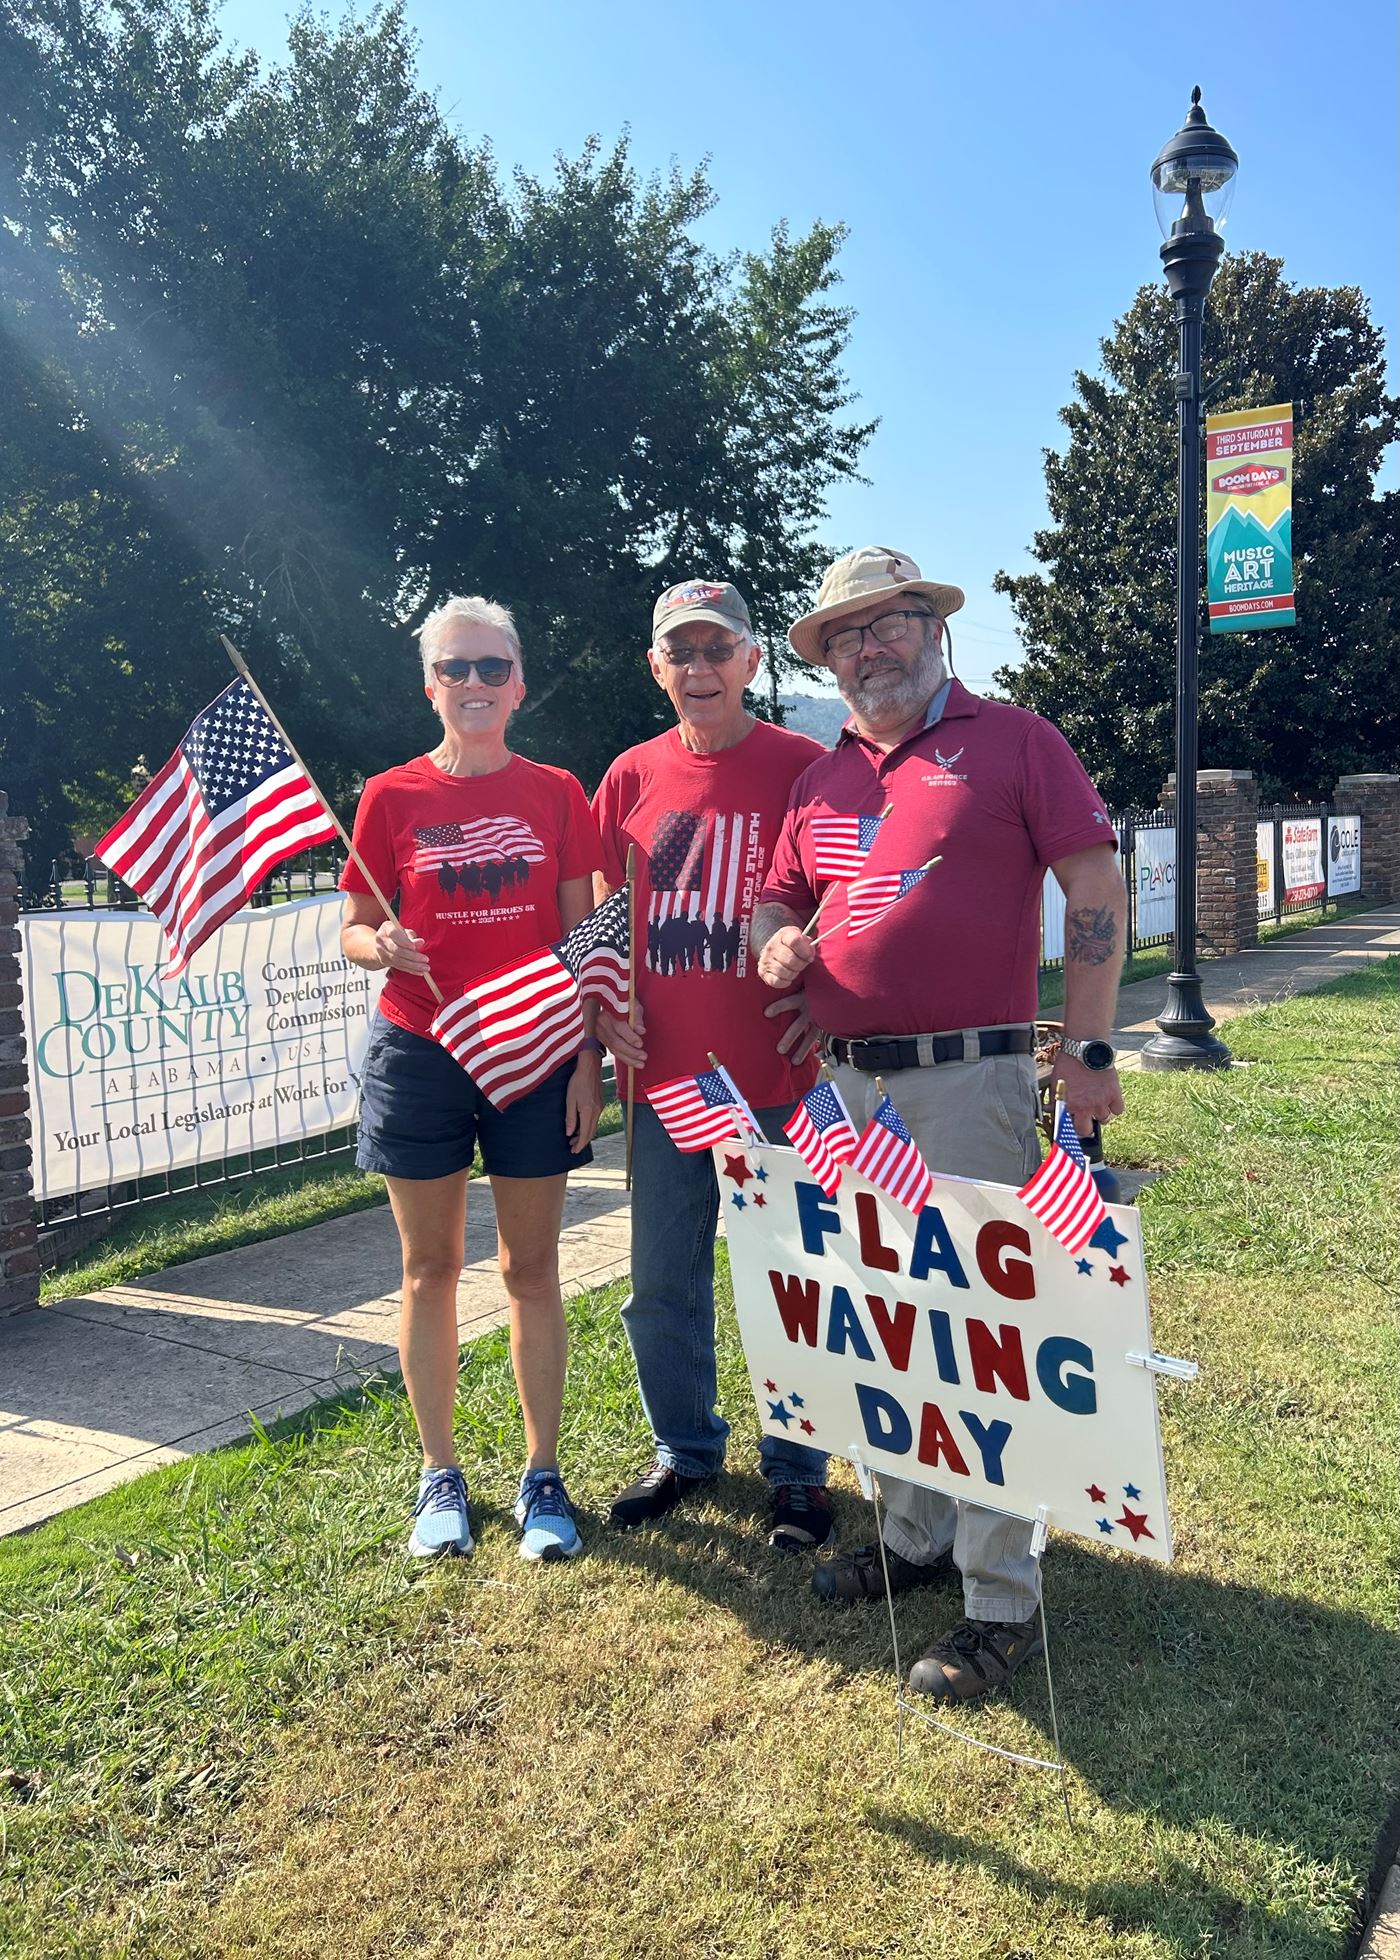 VFW members participating in Flag Waving Day